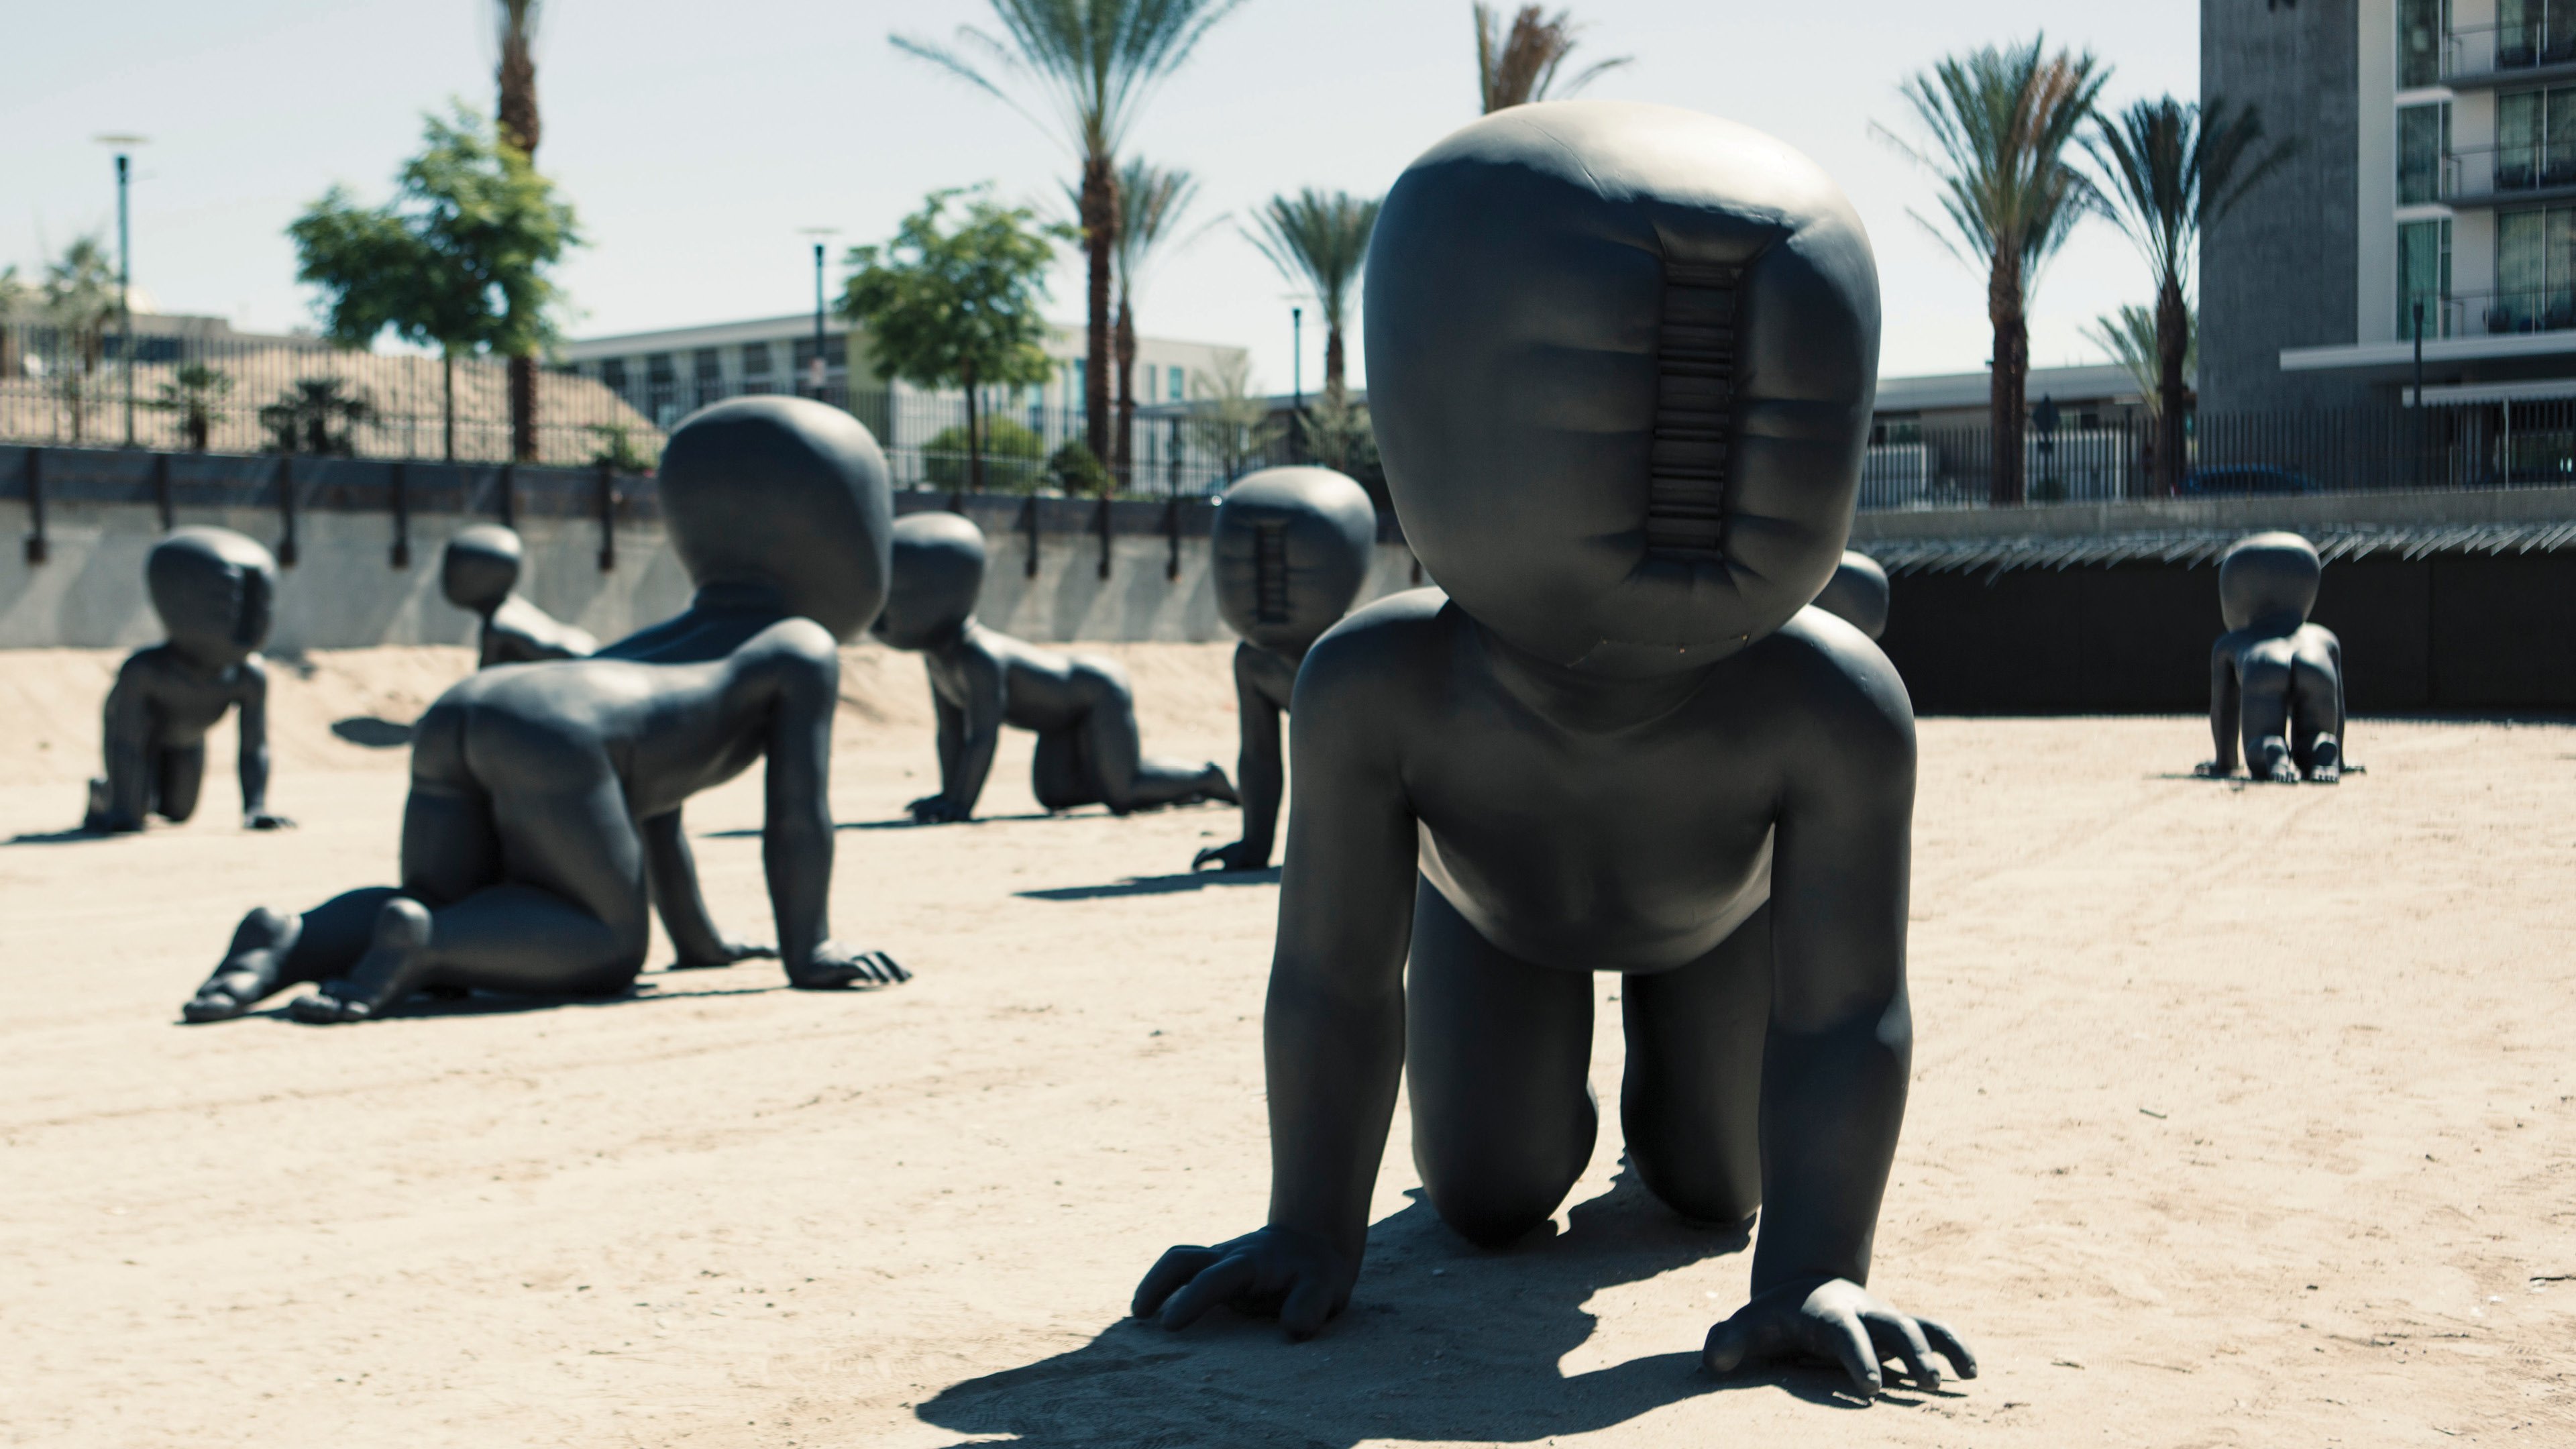 Controversial ‘Palm Springs Babies’ art exhibit will be removed after nearly 5 years